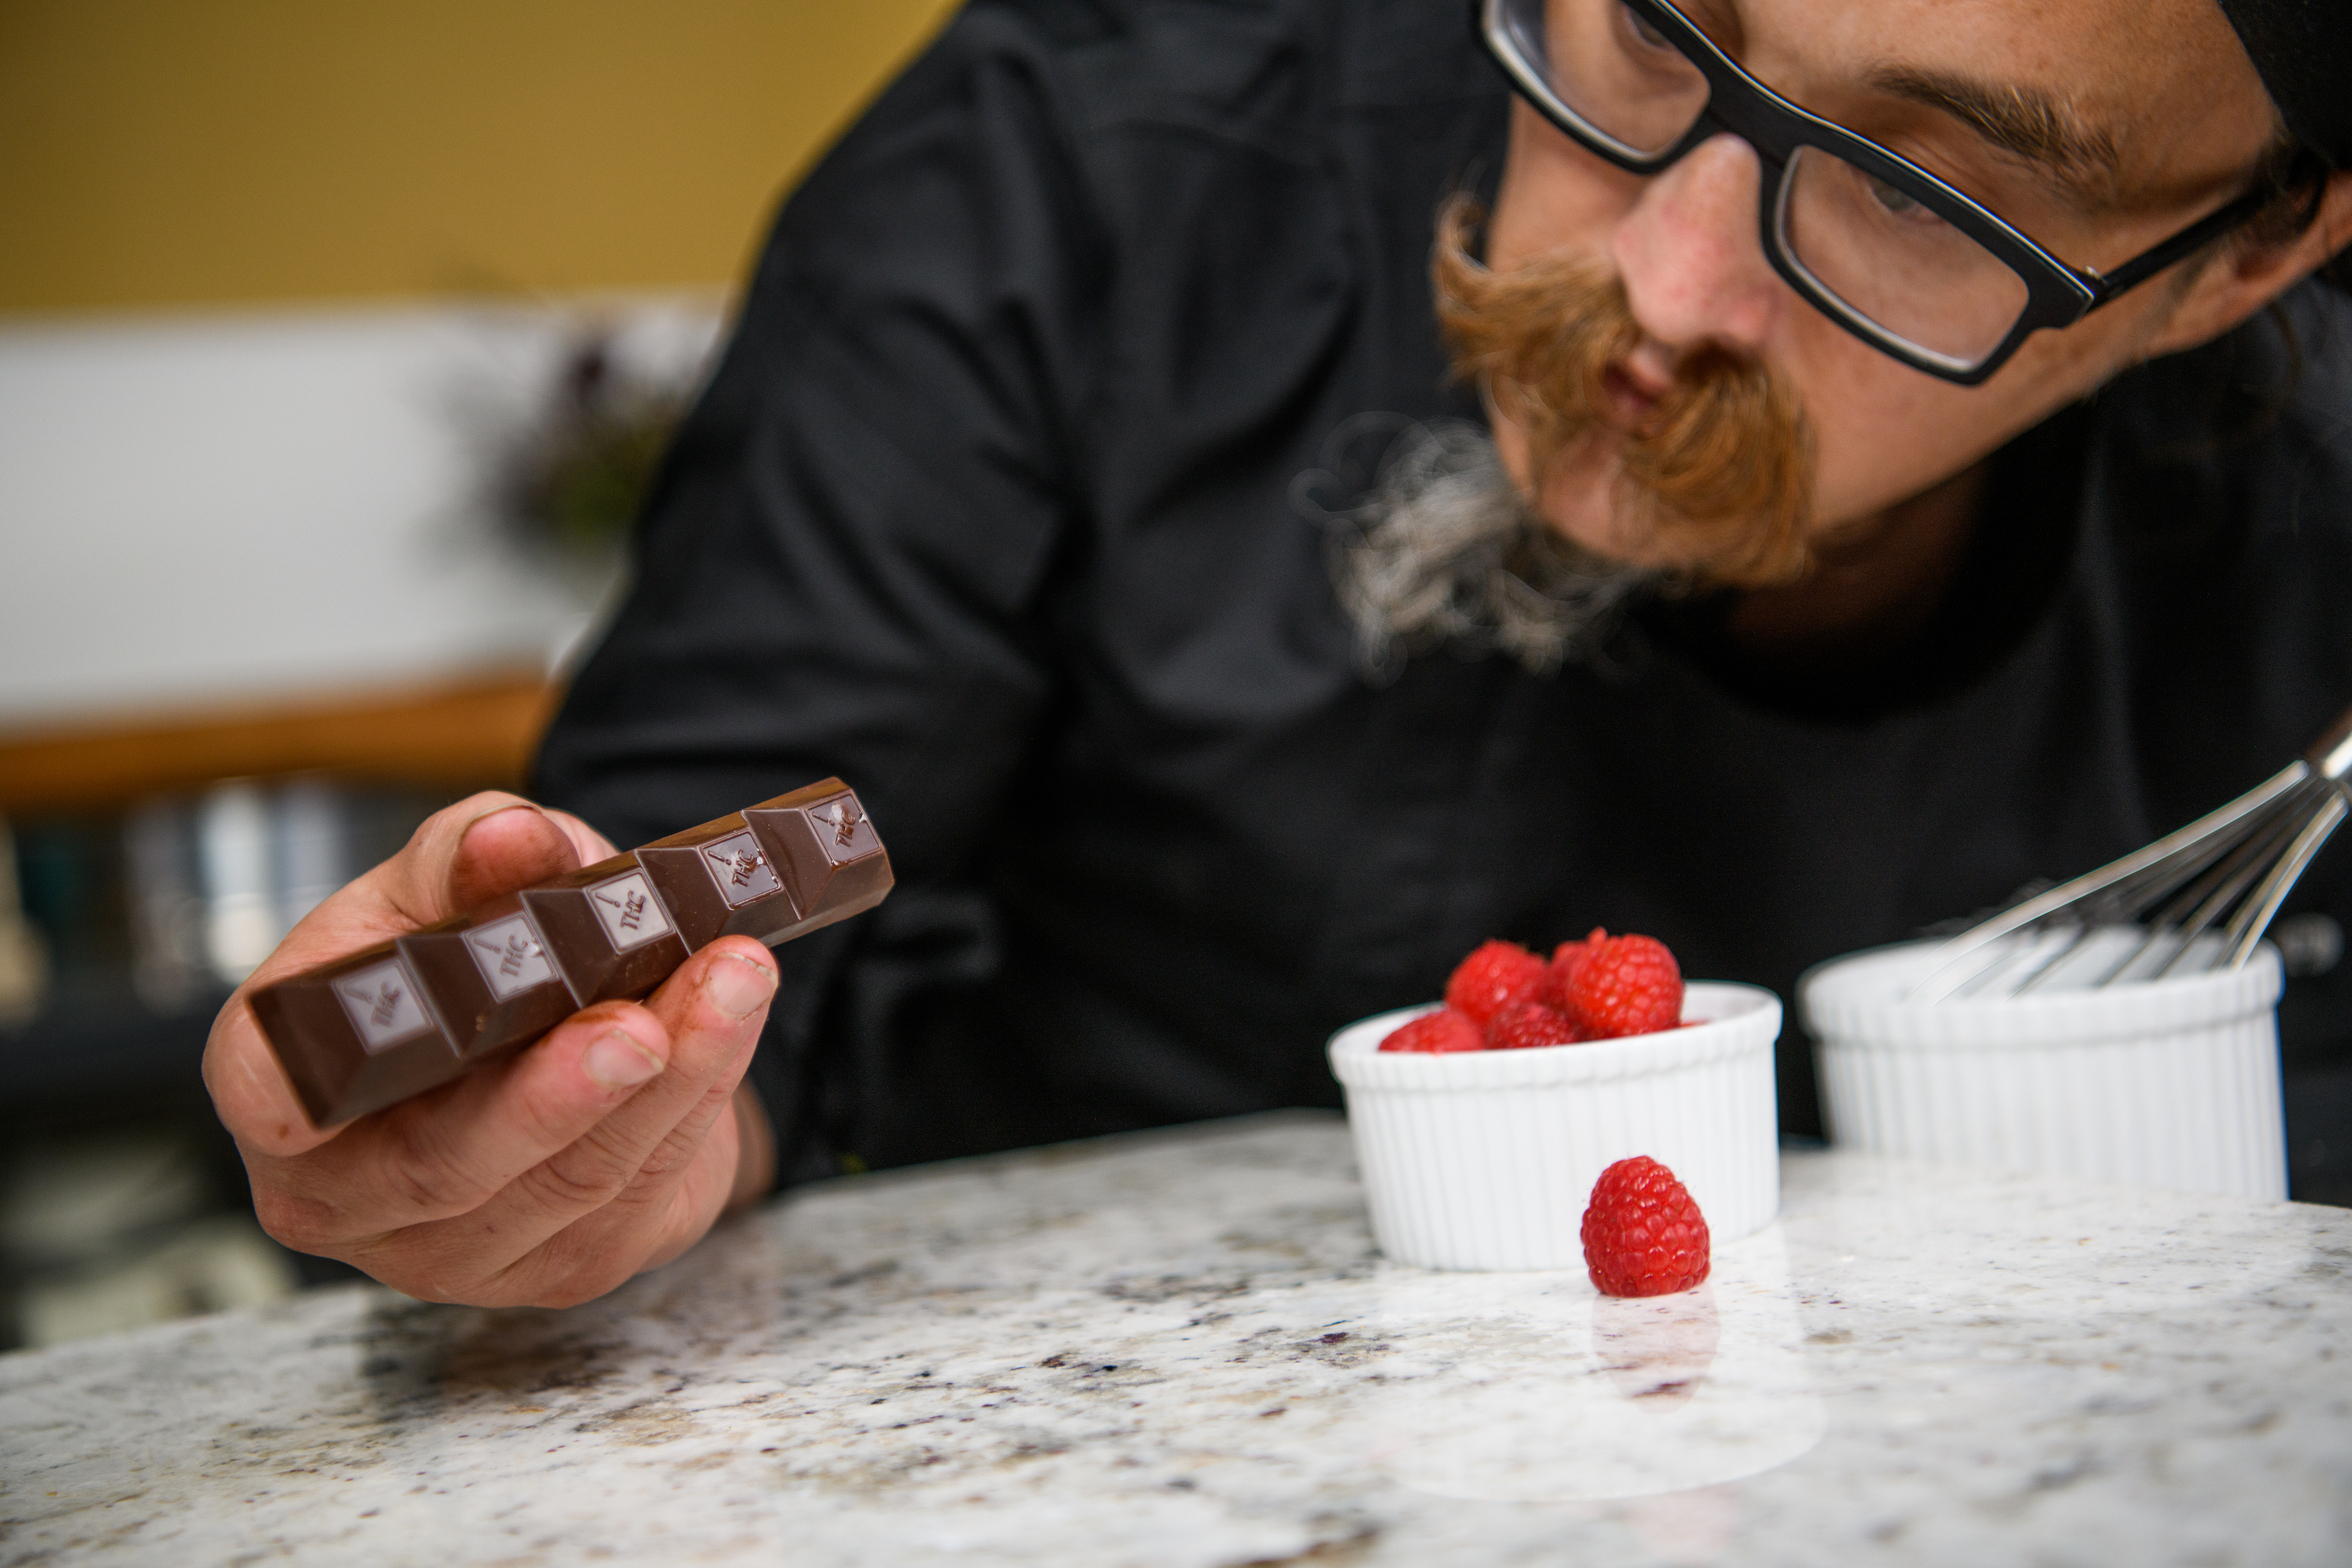 Medically Correct Co-Founder and Executive Chef, Josh Fink, is examining a Nove luxury cannabis chocolate bar.